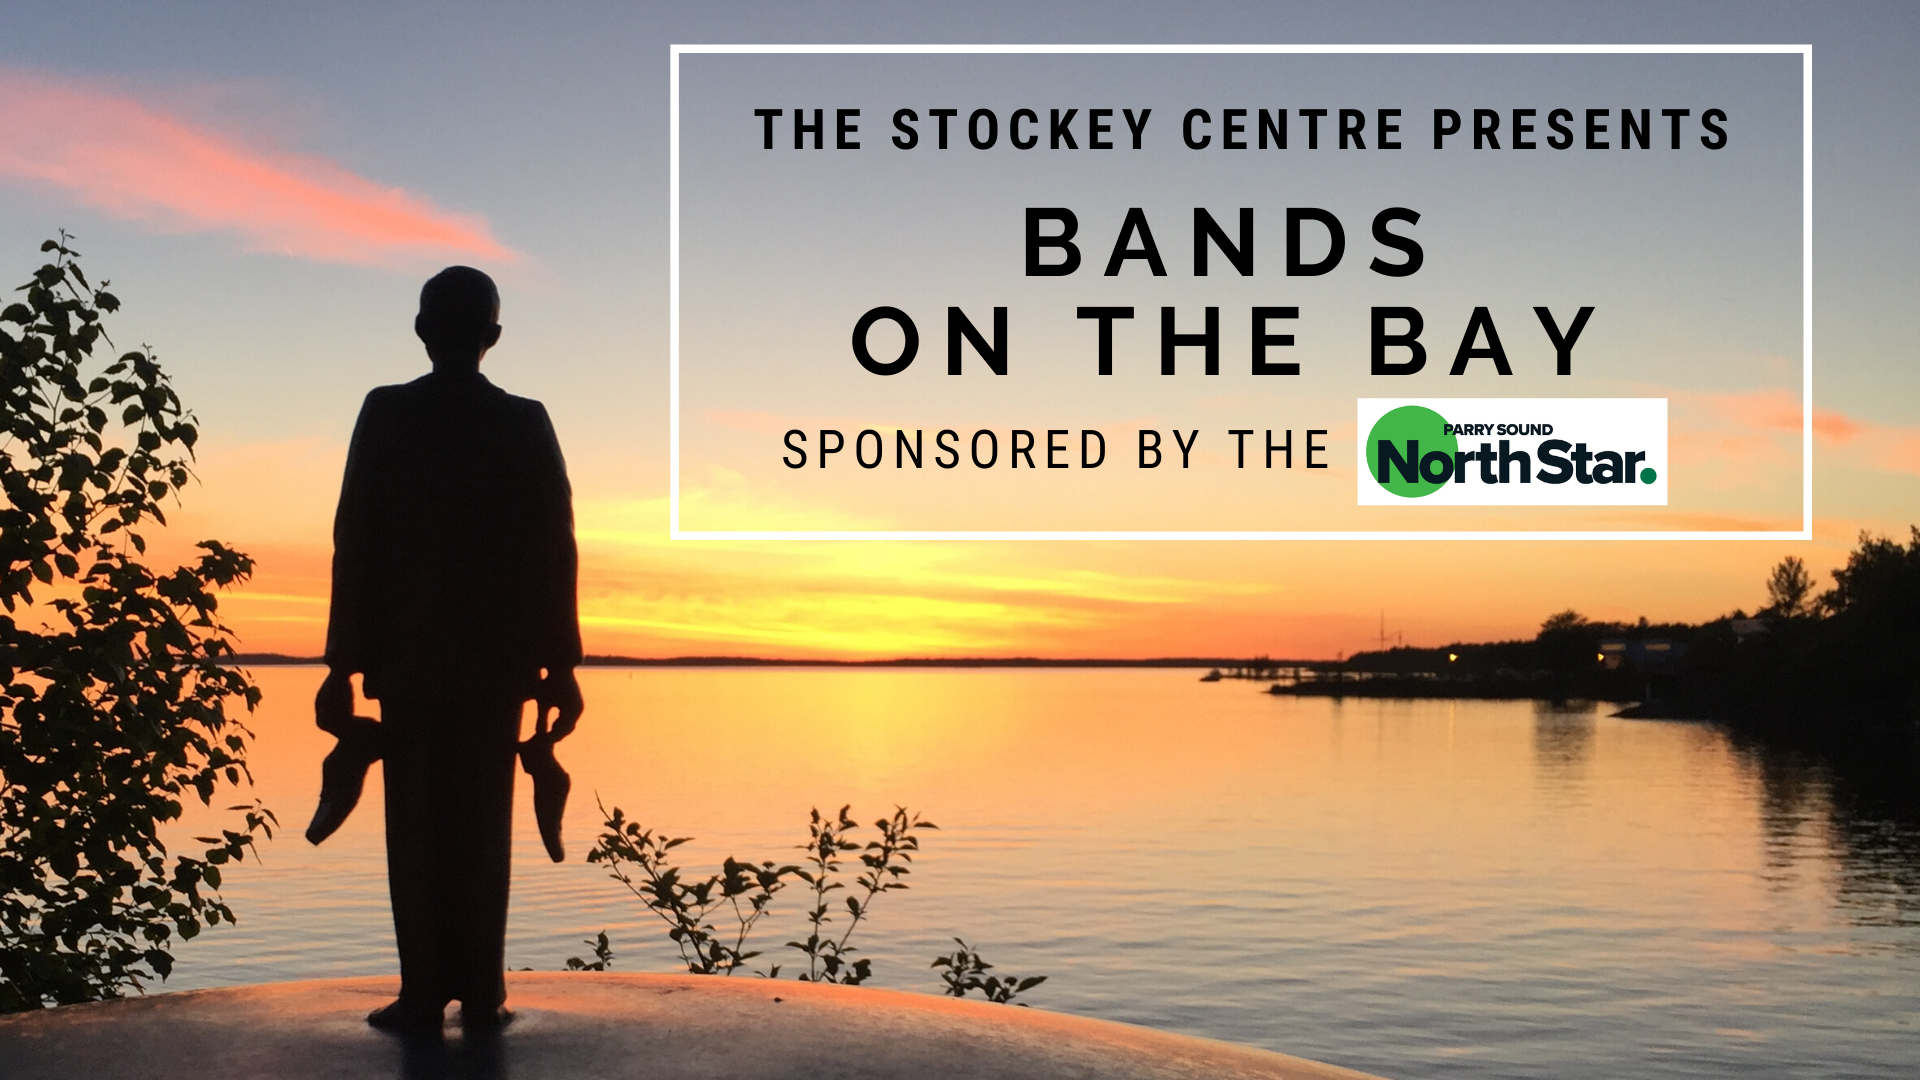 The Stockey Centre presents Bands on the Bay sponsored by the North Star